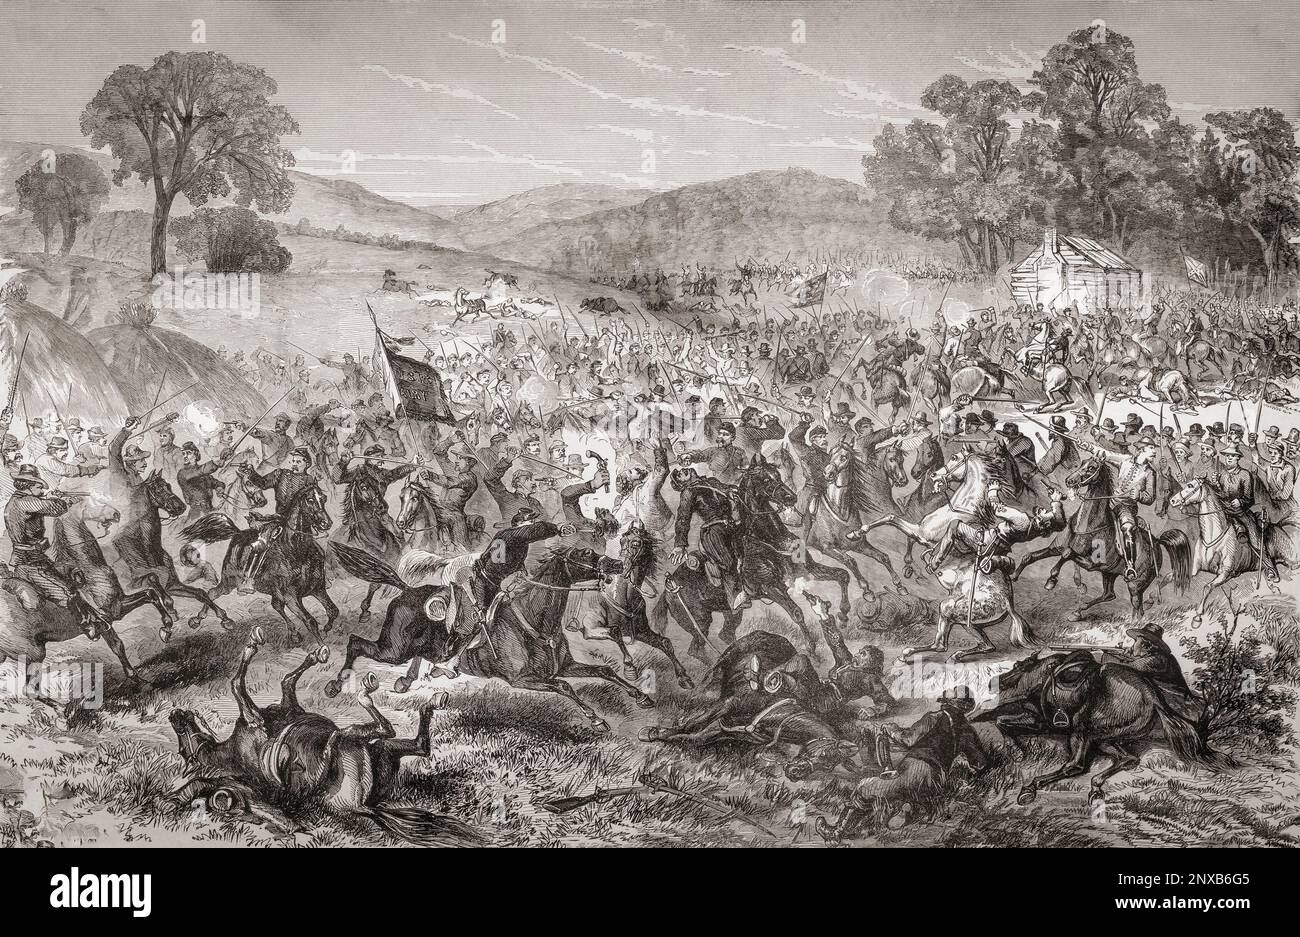 General John Buford's engagement with Major General J.E.B. Stuart's Confederate cavalry, at the Battle of Boonsboro, Maryland, July 8, 1863.  After a work by C.E.H. Bonwill. Stock Photo